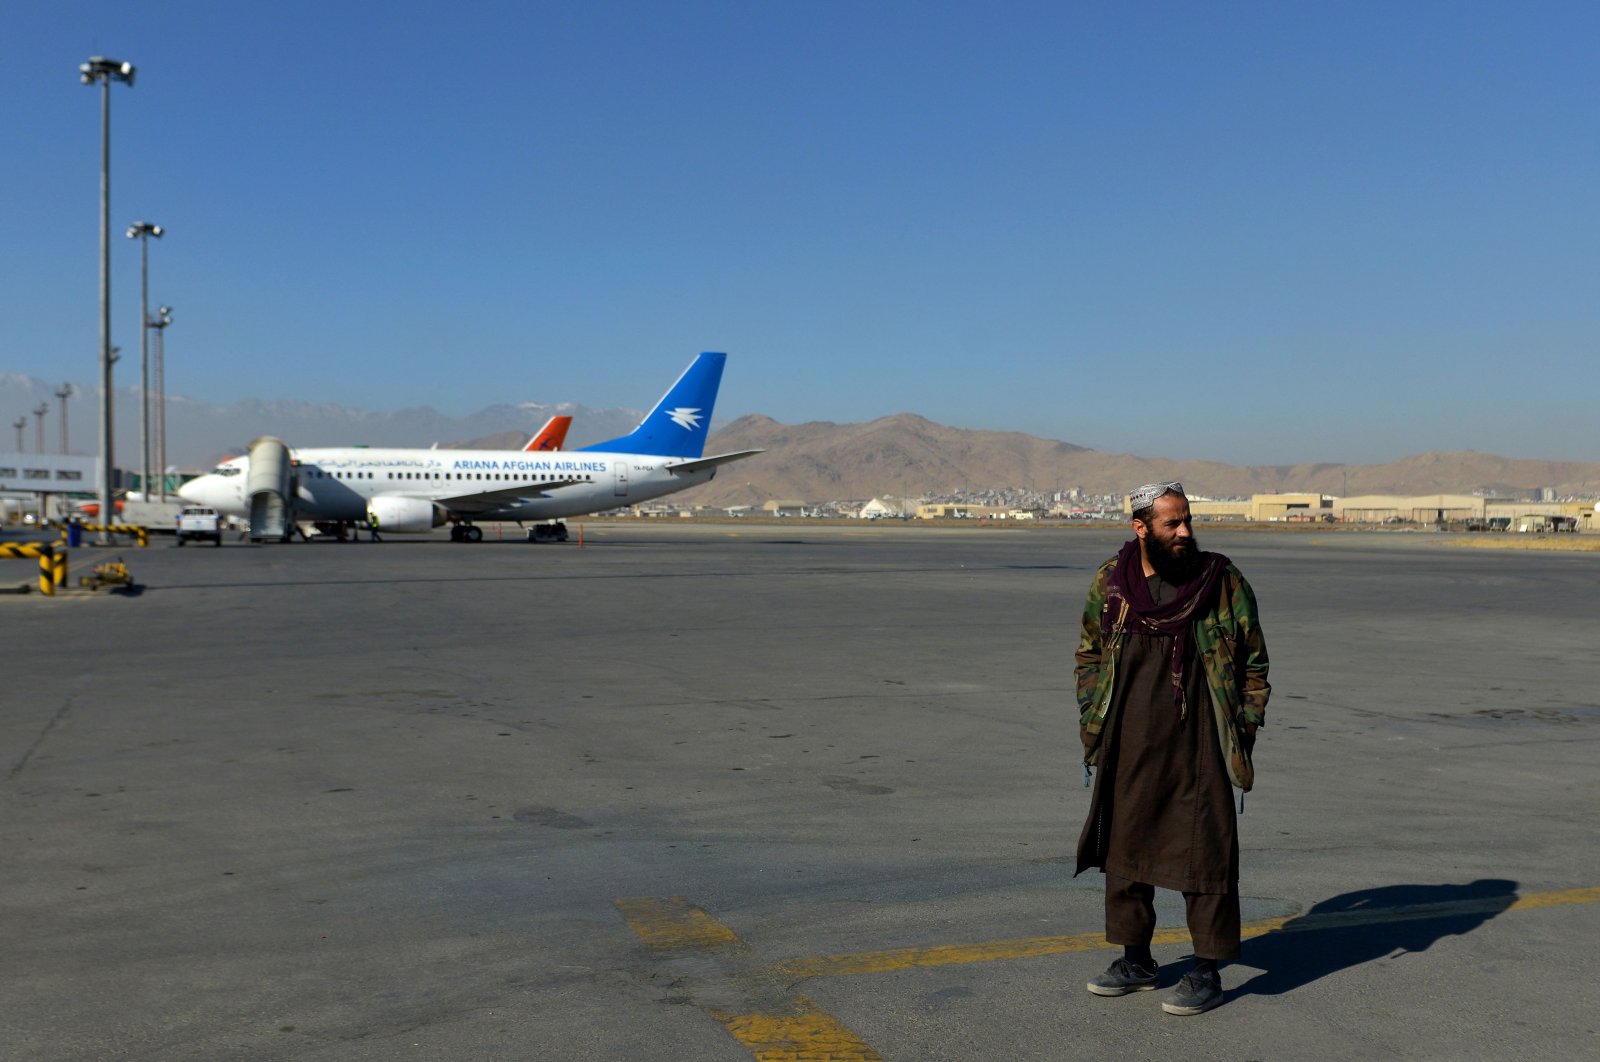 A member of the Taliban stands on the runway at the Kabul airport in Kabul, Afghanistan, Dec. 8, 2021. (AFP File Photo)